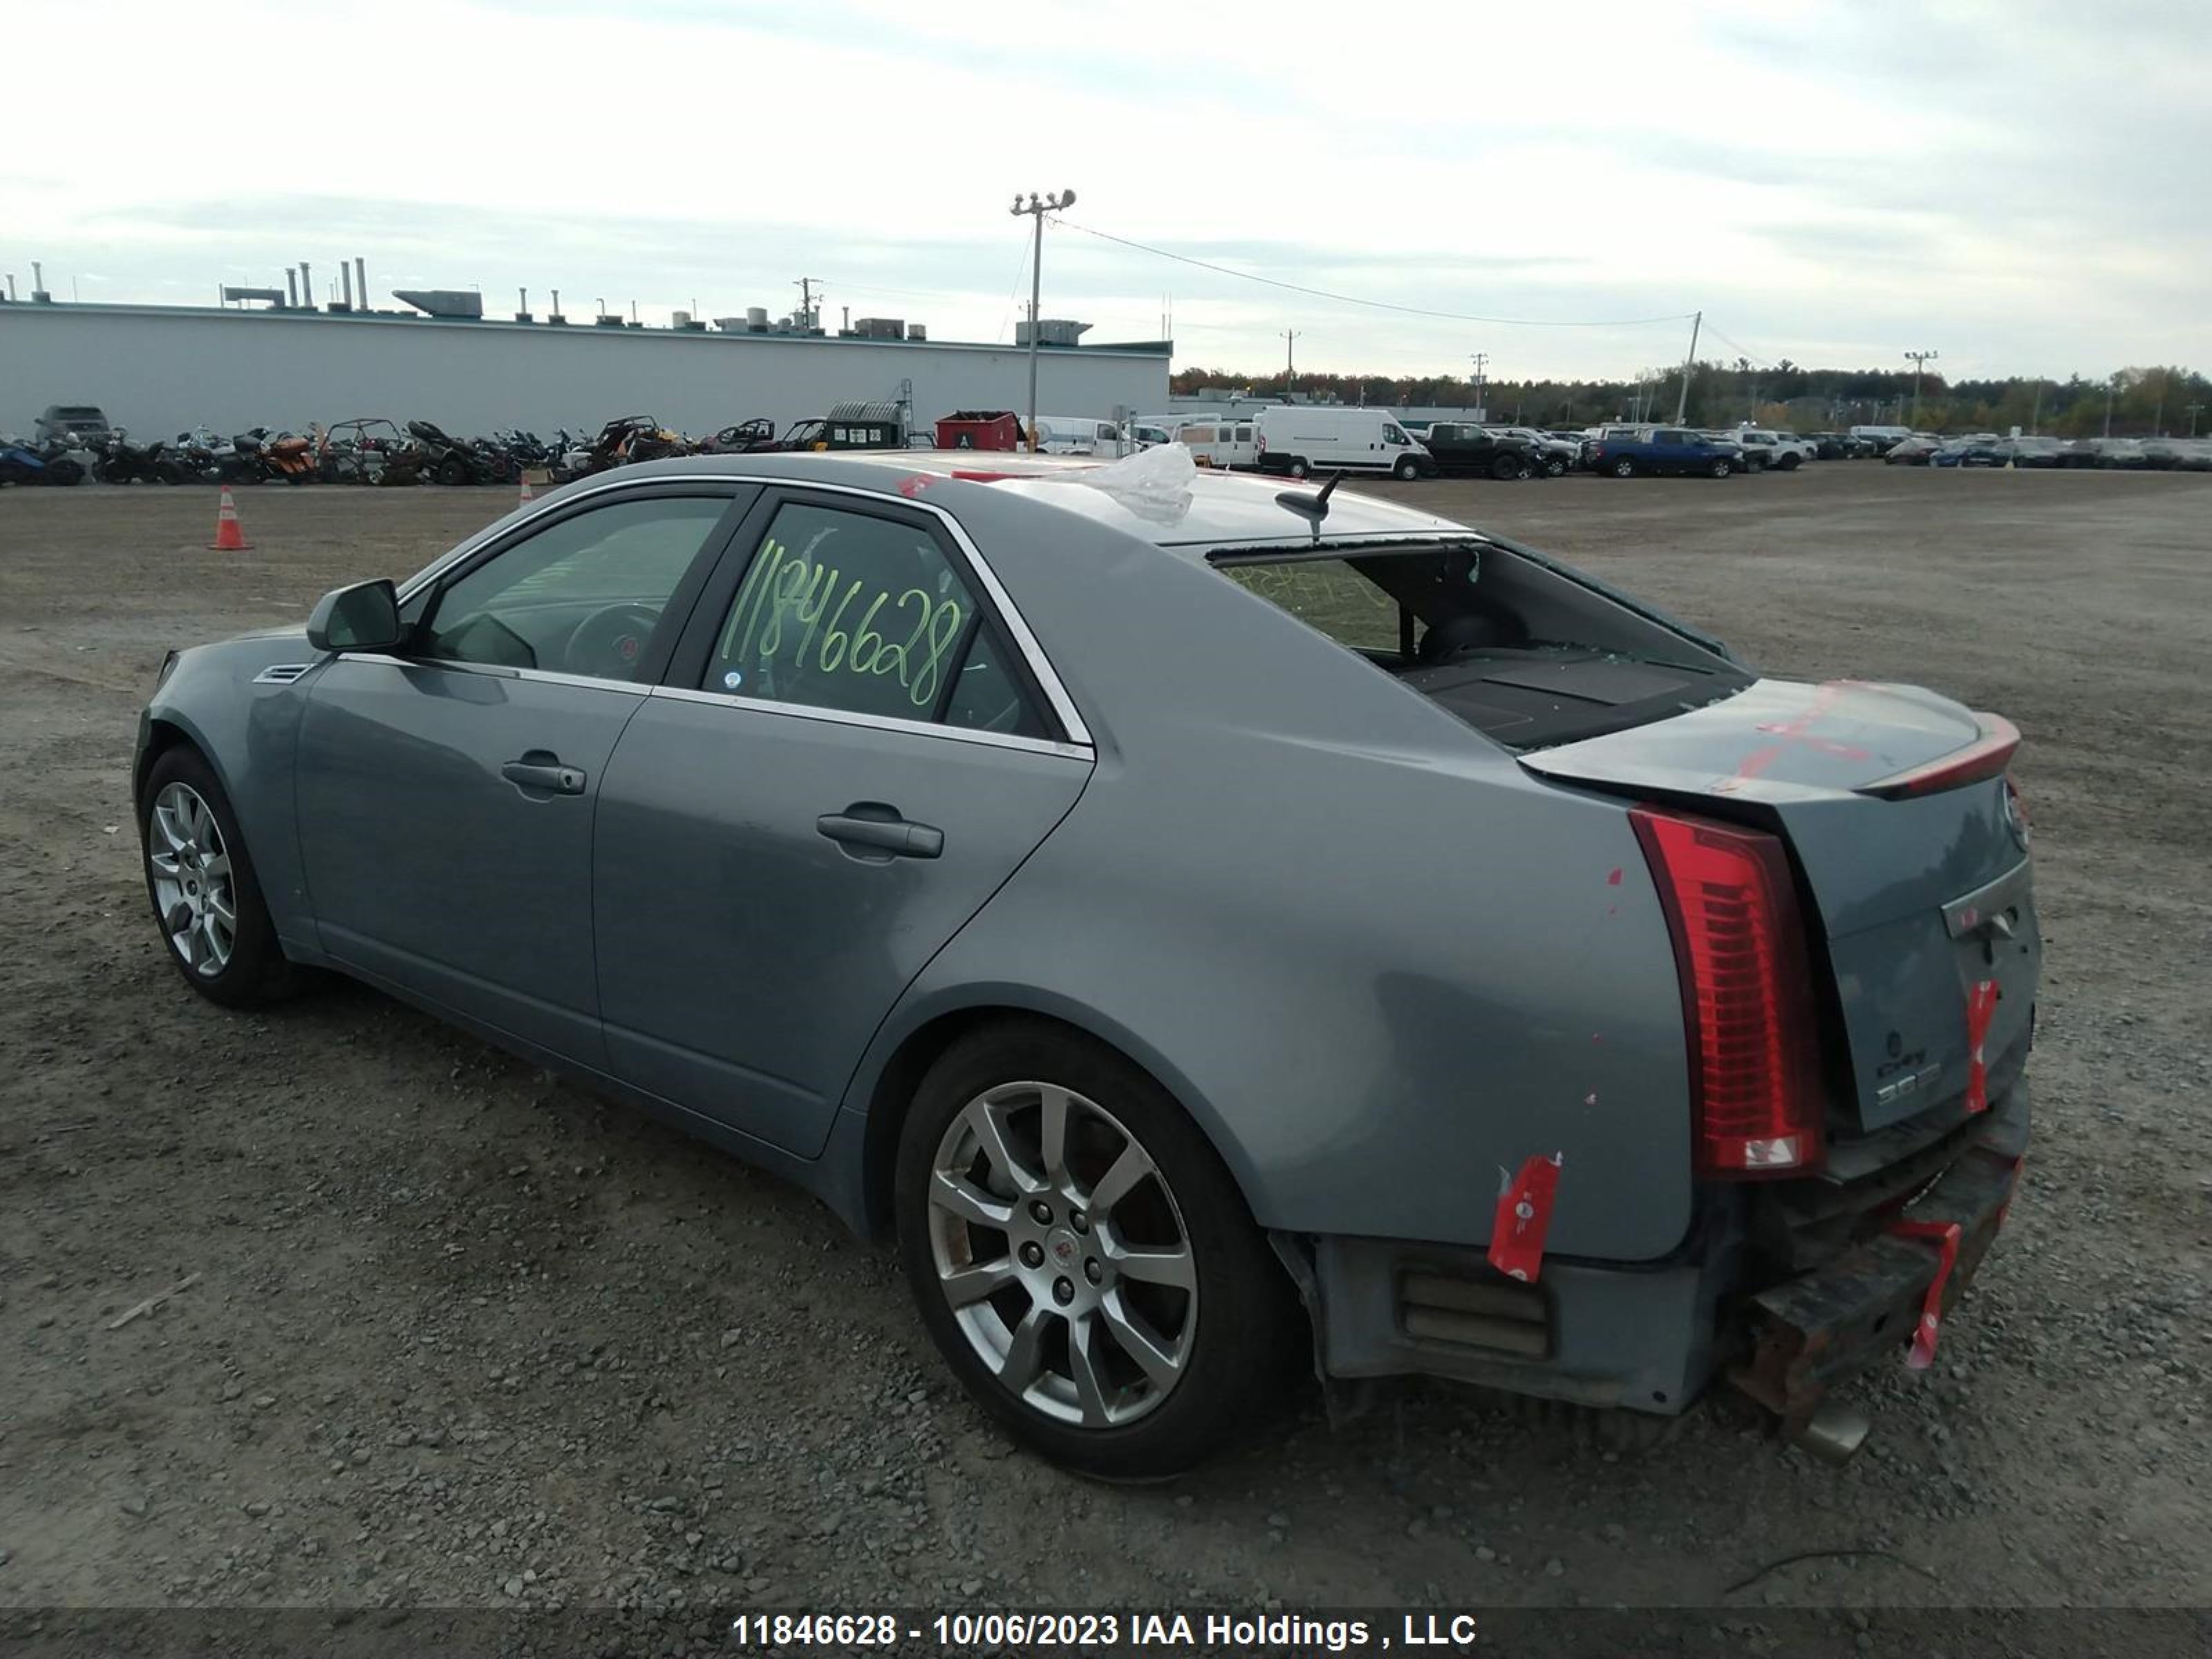 1G6DT57V880174548  - CADILLAC CTS  2008 IMG - 2